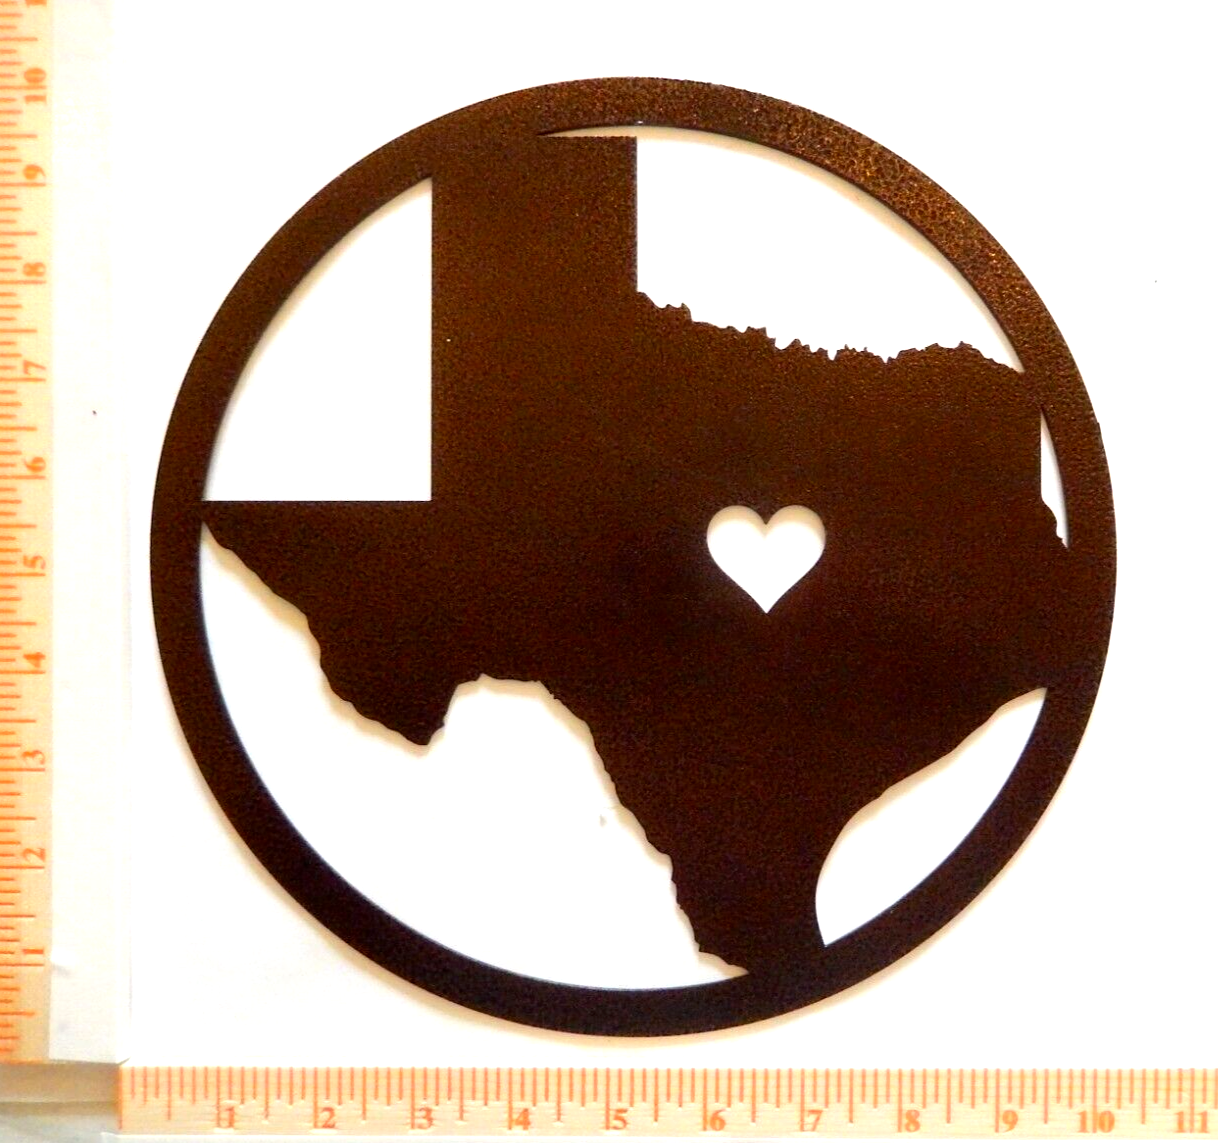 "NEW" STATE OF TEXAS WITH HEART" METAL WALL ART 14ga. - 10"x10"